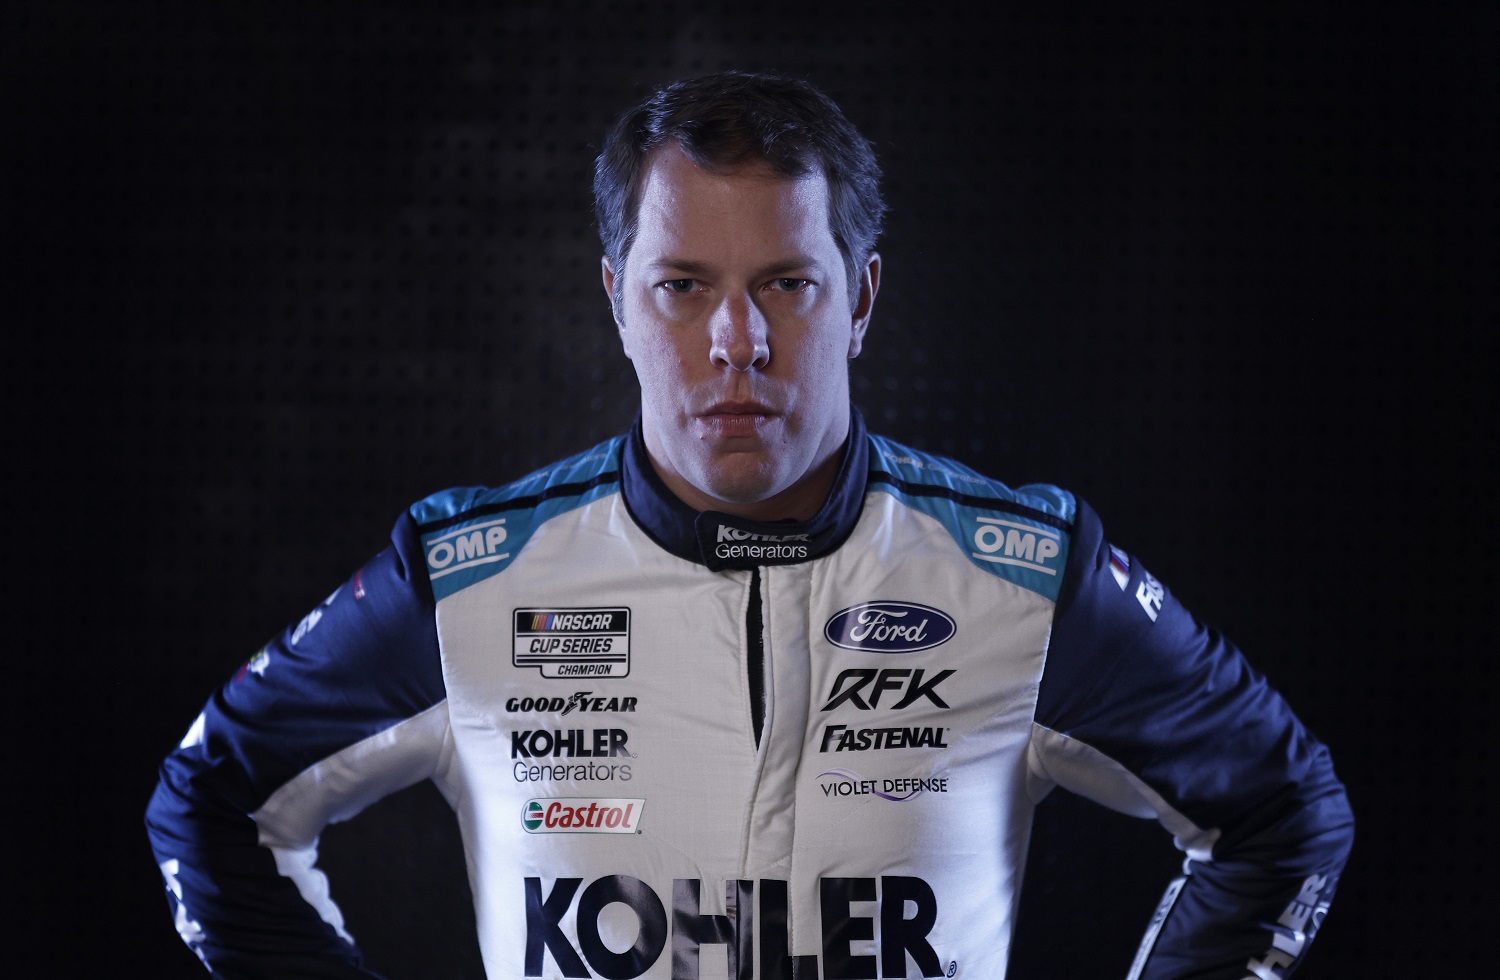 NASCAR driver Brad Keselowski poses for a photo during the NASCAR Production Days at Clutch Studios on Jan. 18, 2022, in Concord, North Carolina. | Jared C. Tilton/Getty Images